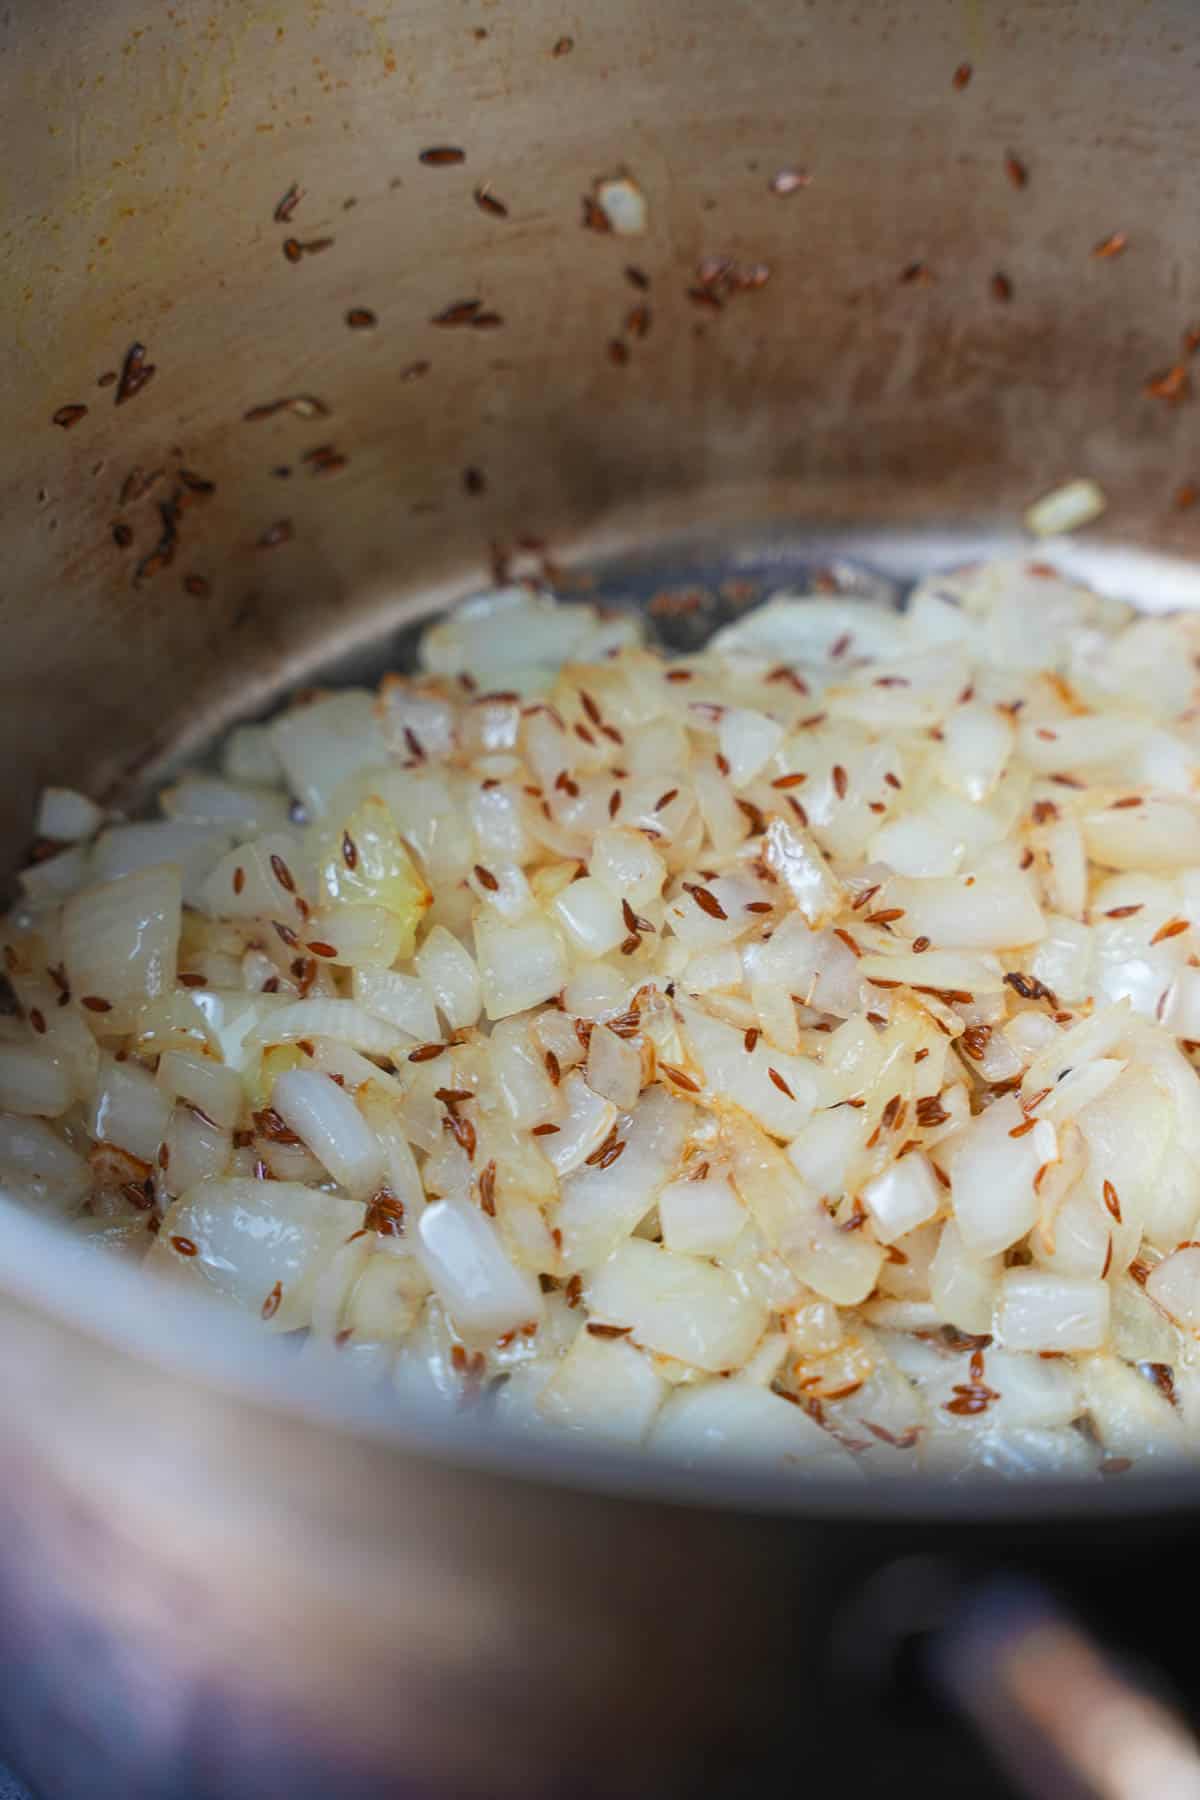 Onion sauteing with cumin seeds in a stainless steel pot.